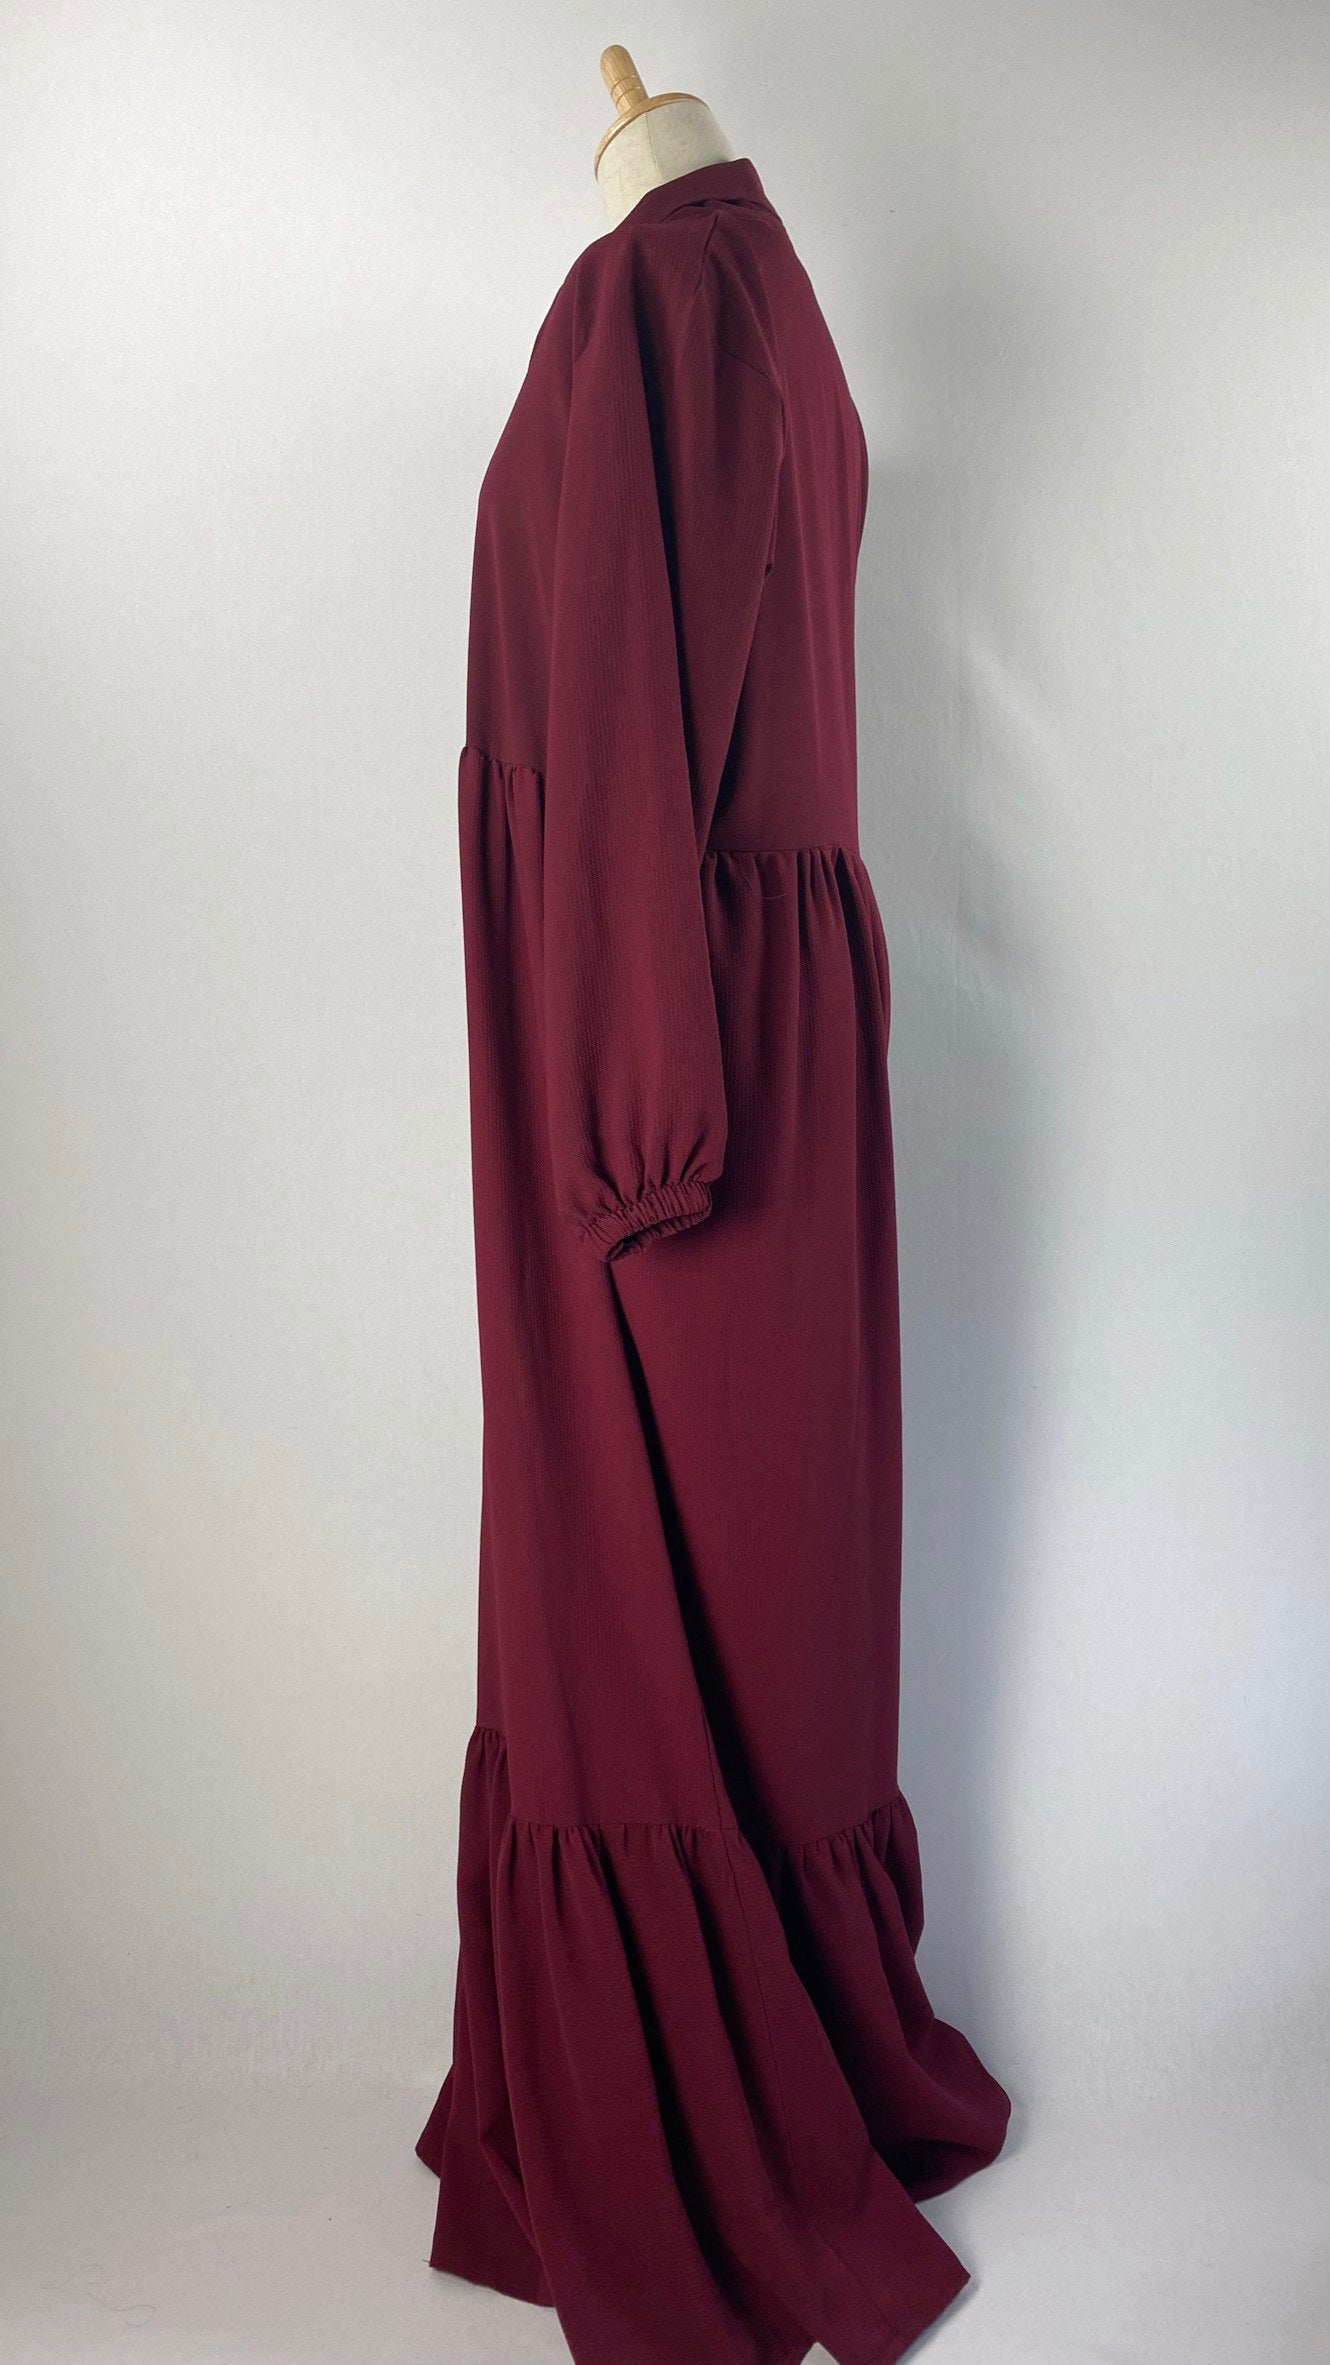 Long Sleeve Maxi Dress with Tie at Neck, Maroon